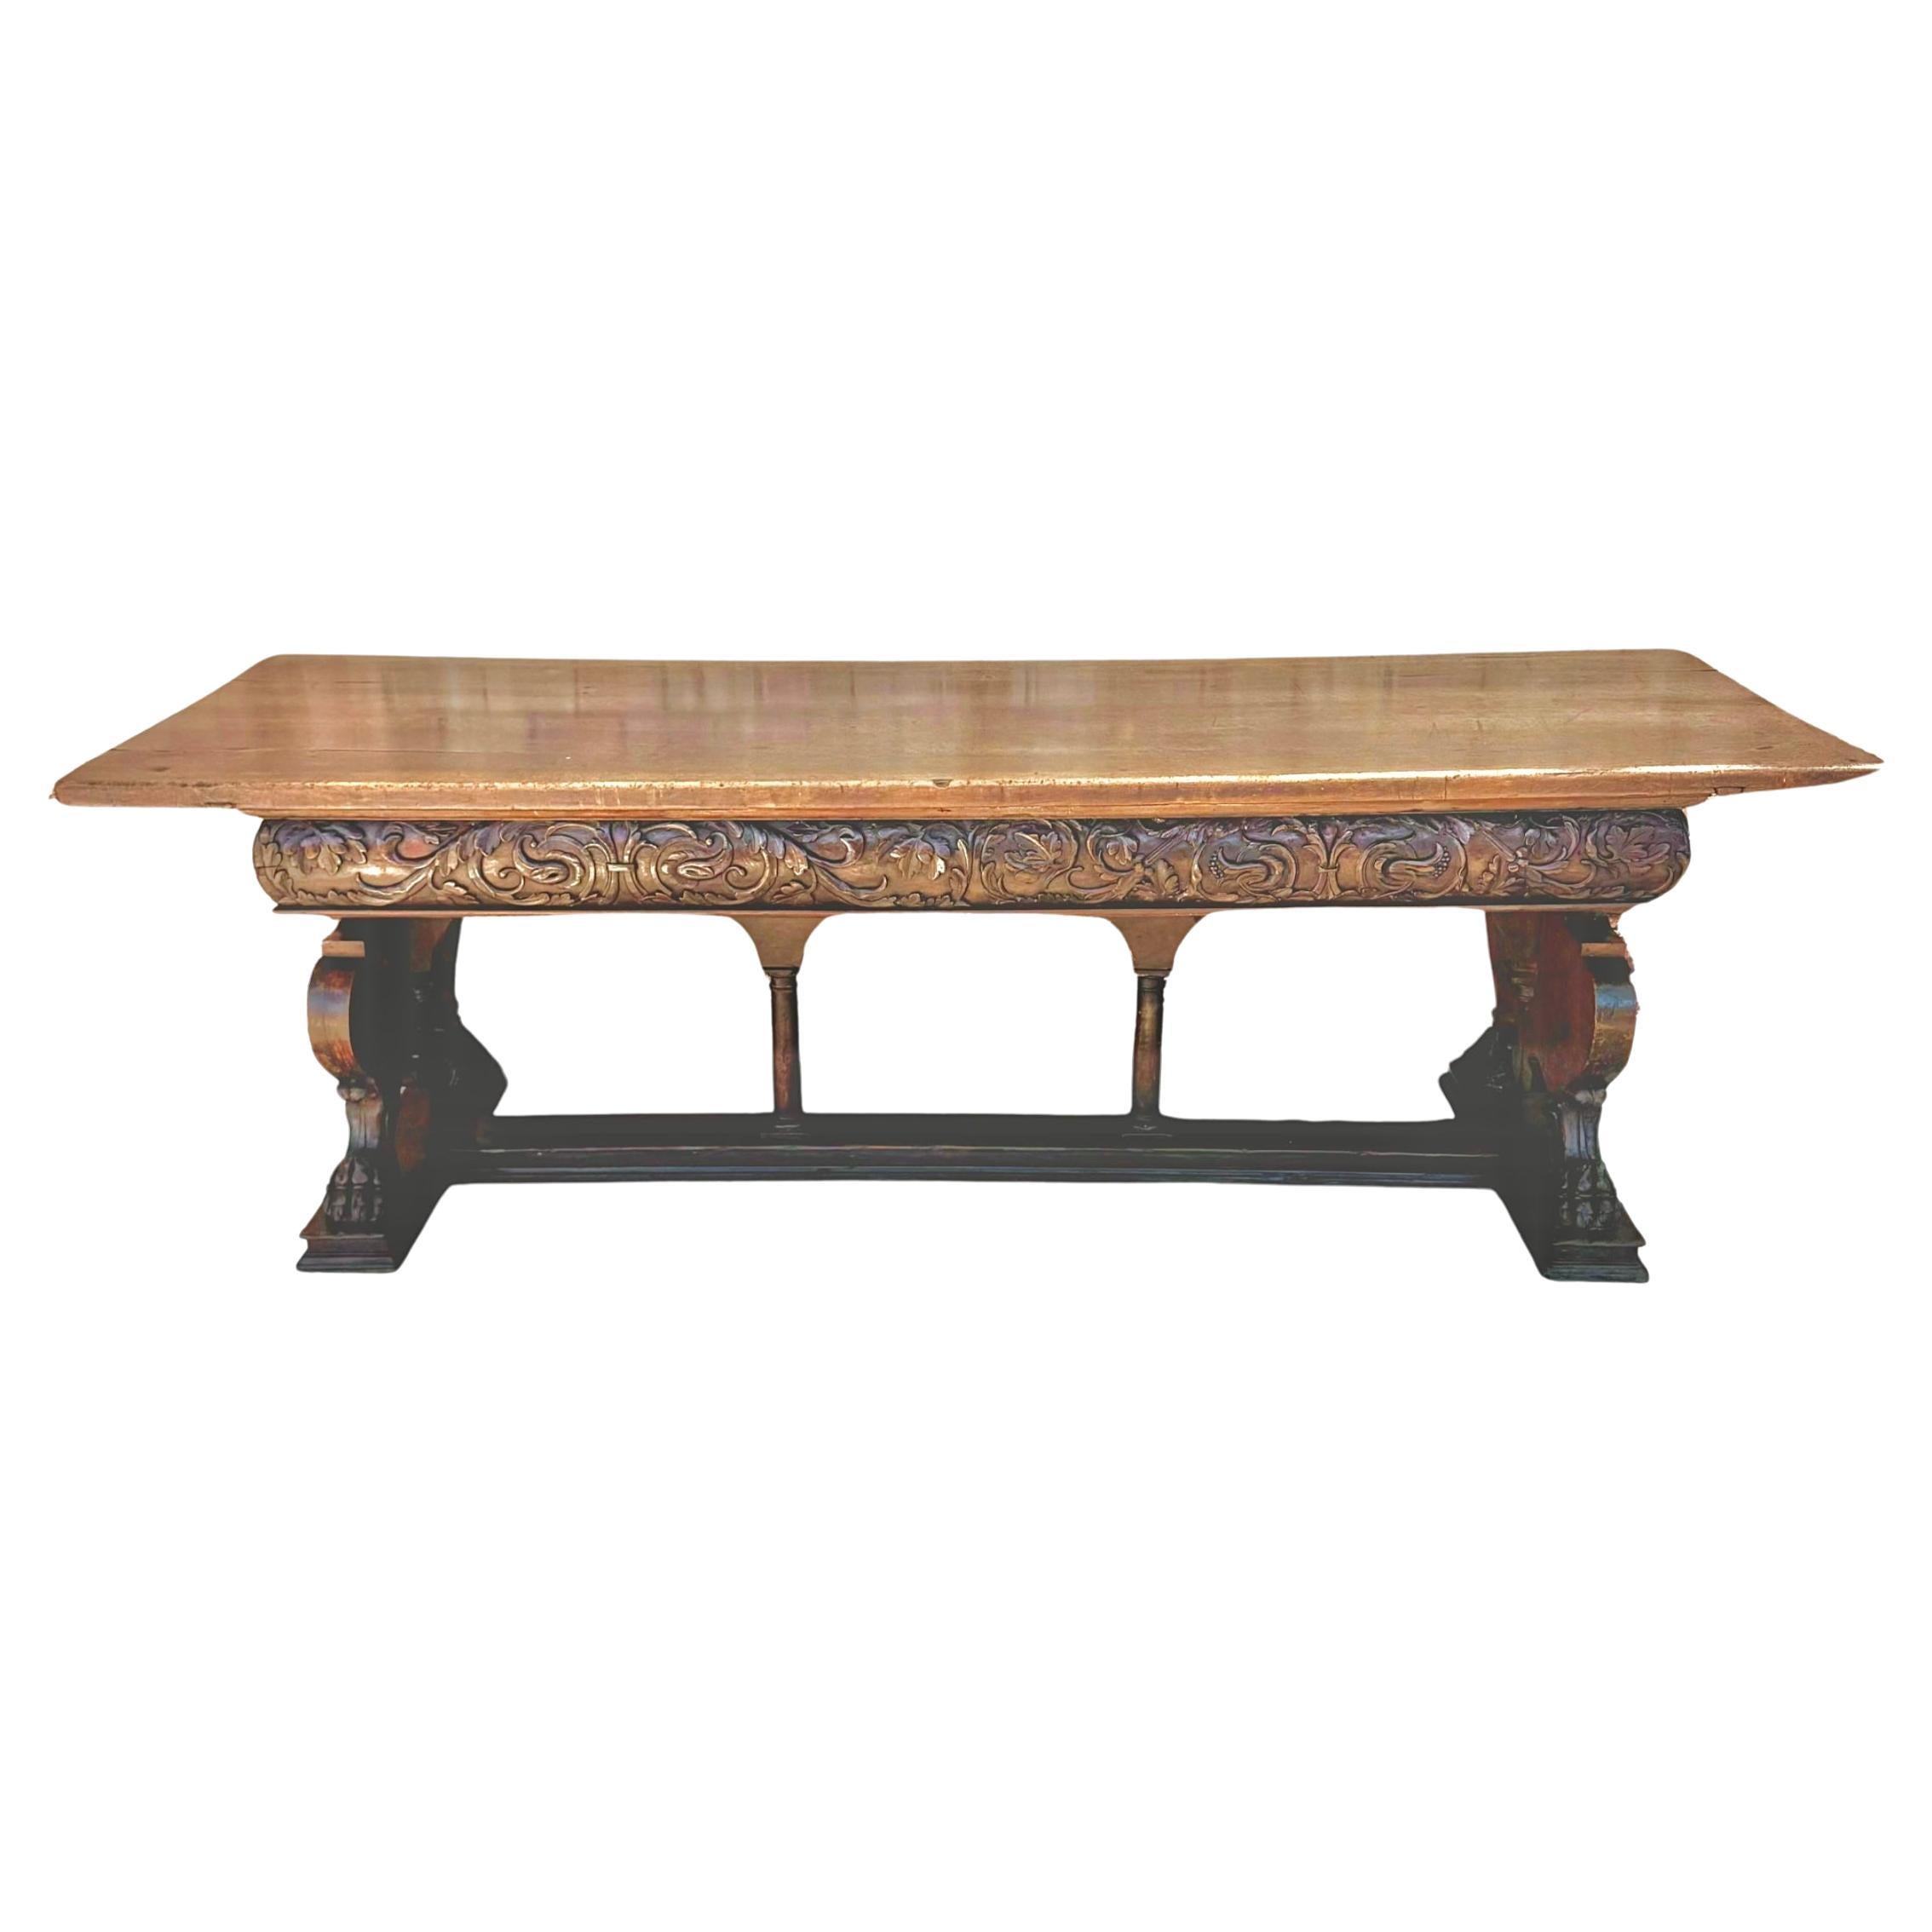 Stunning 17th century Italian Renaissance walnut center table. Table features a rectangular top above intricately cared frieze on wide carved end pieces, culminating in large paw feet. Table is supported by a large thick beam stretcher. Wood retains